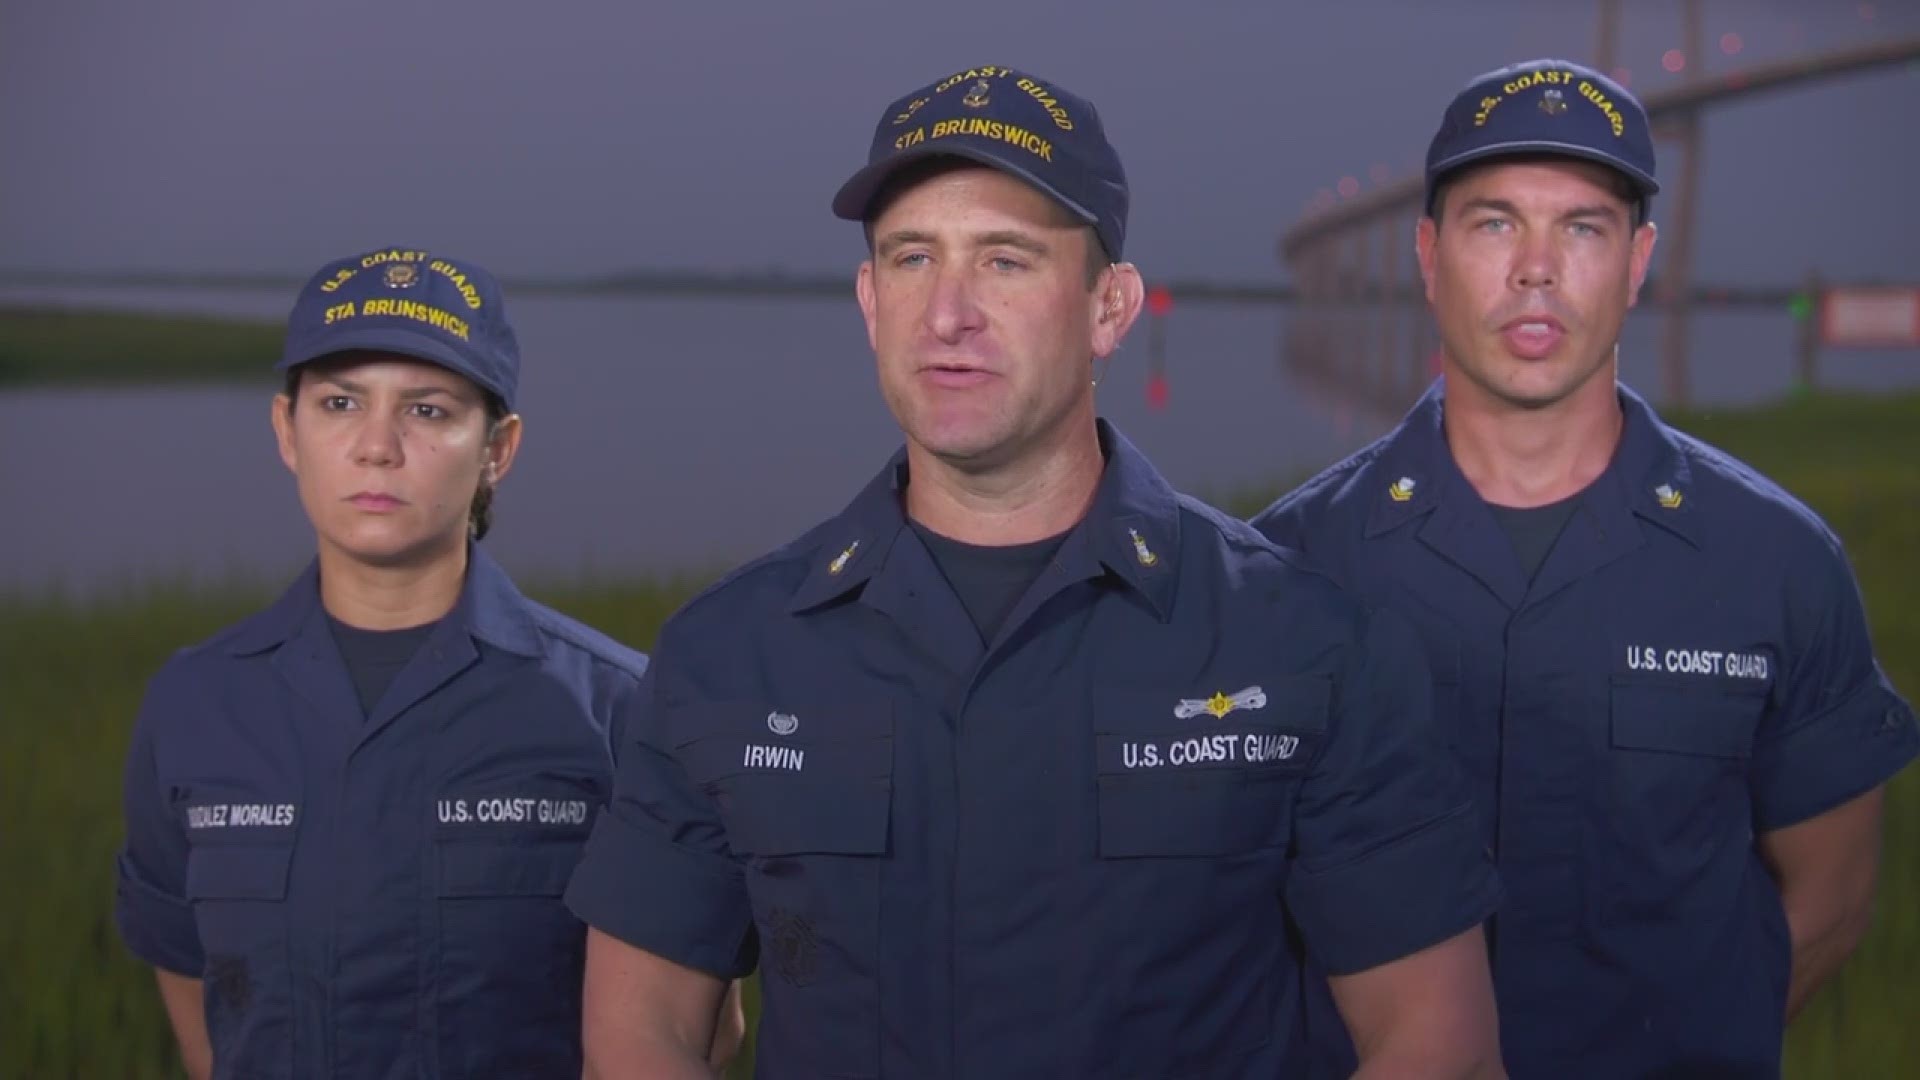 Senior Chief Justin Irwin with the U.S Coast Guard talks about the rescue of over two dozen crewmembers and how the South Georgia community came together to show support. #GMA